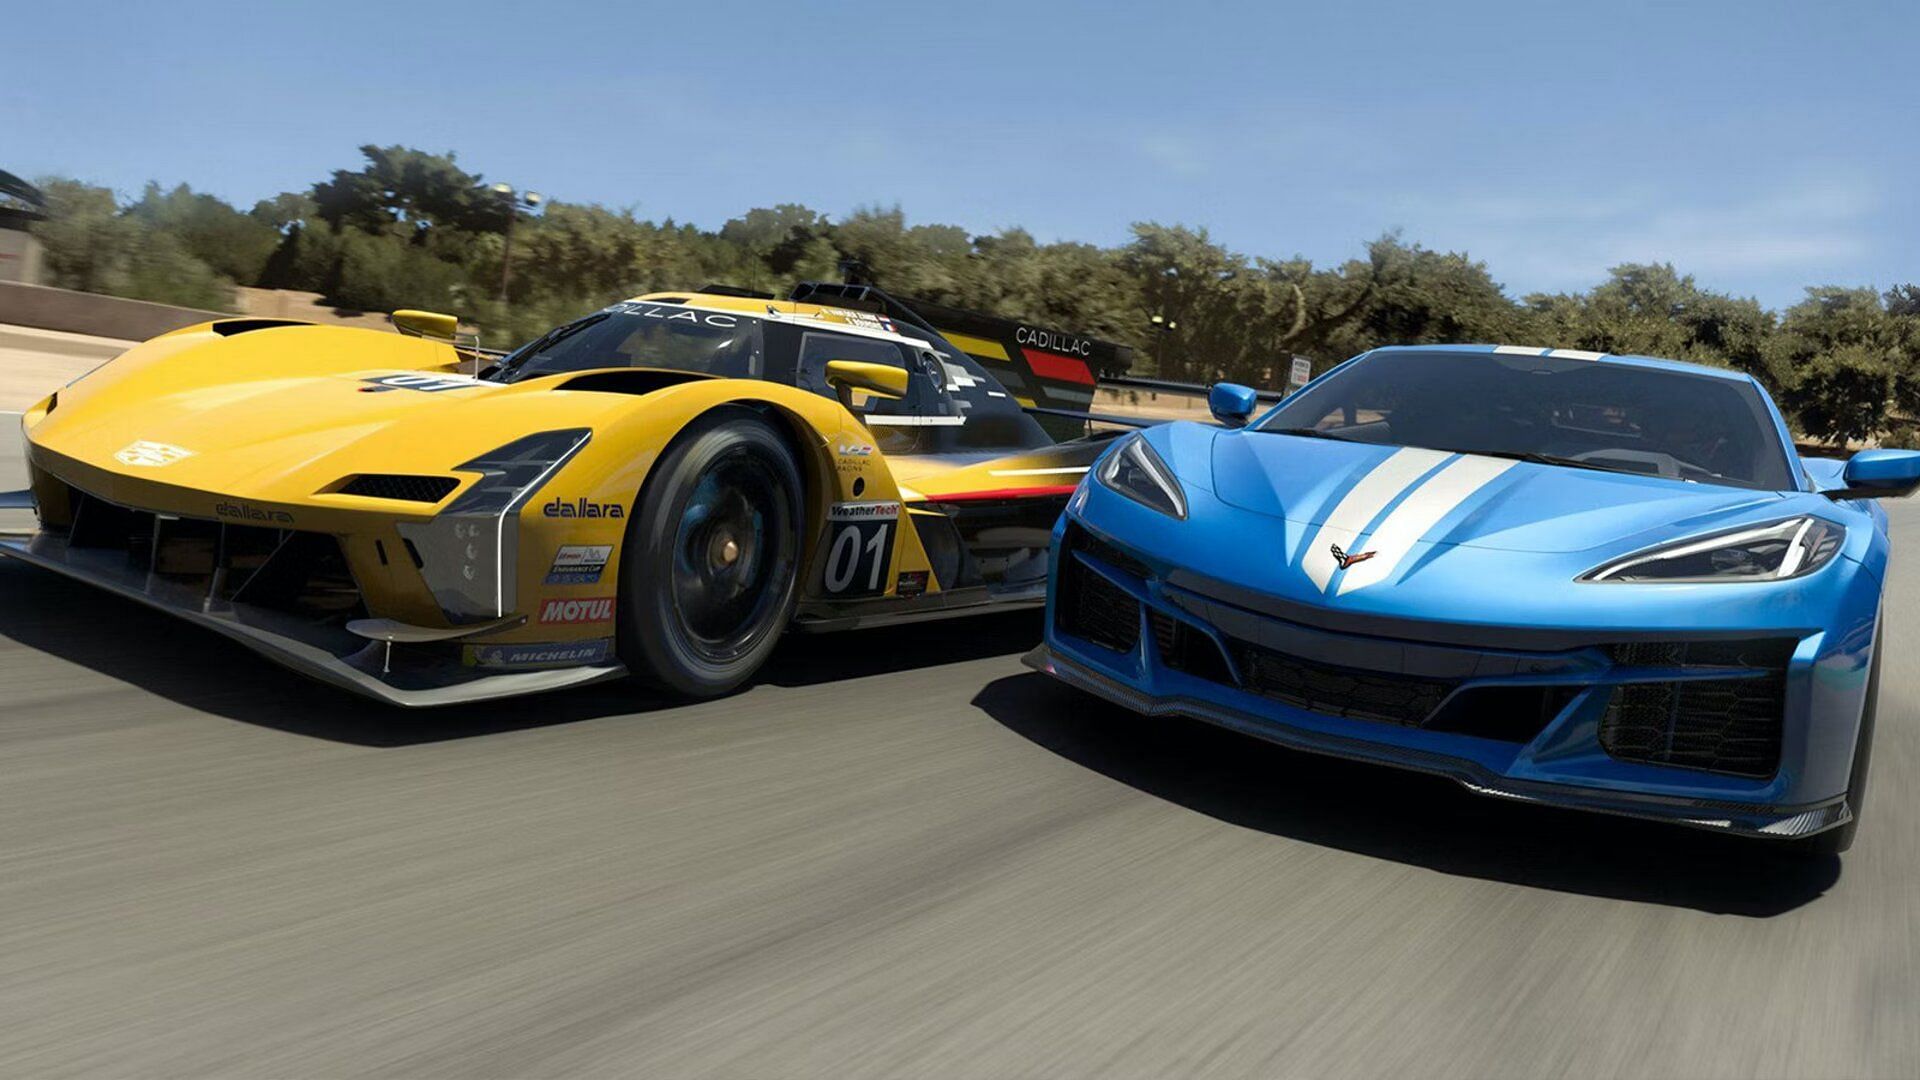 The AI in Forza Motorsport has been criticized for delivering incompetent racing experiences to players. (Image via Turn10 Studios)